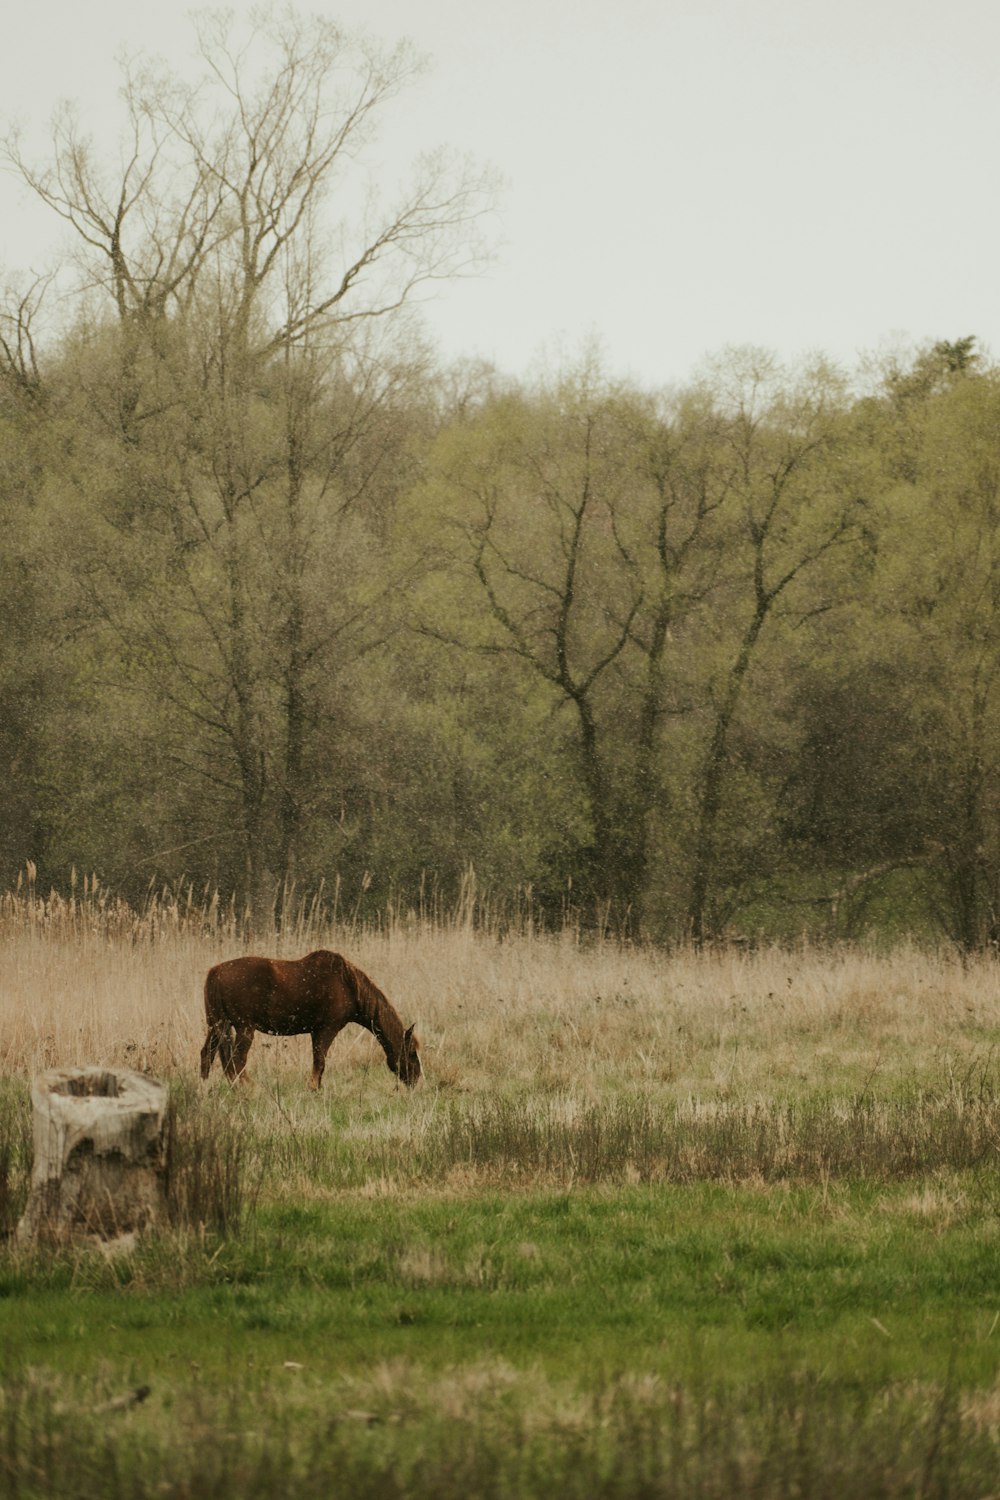 a horse grazing in a field with trees in the background